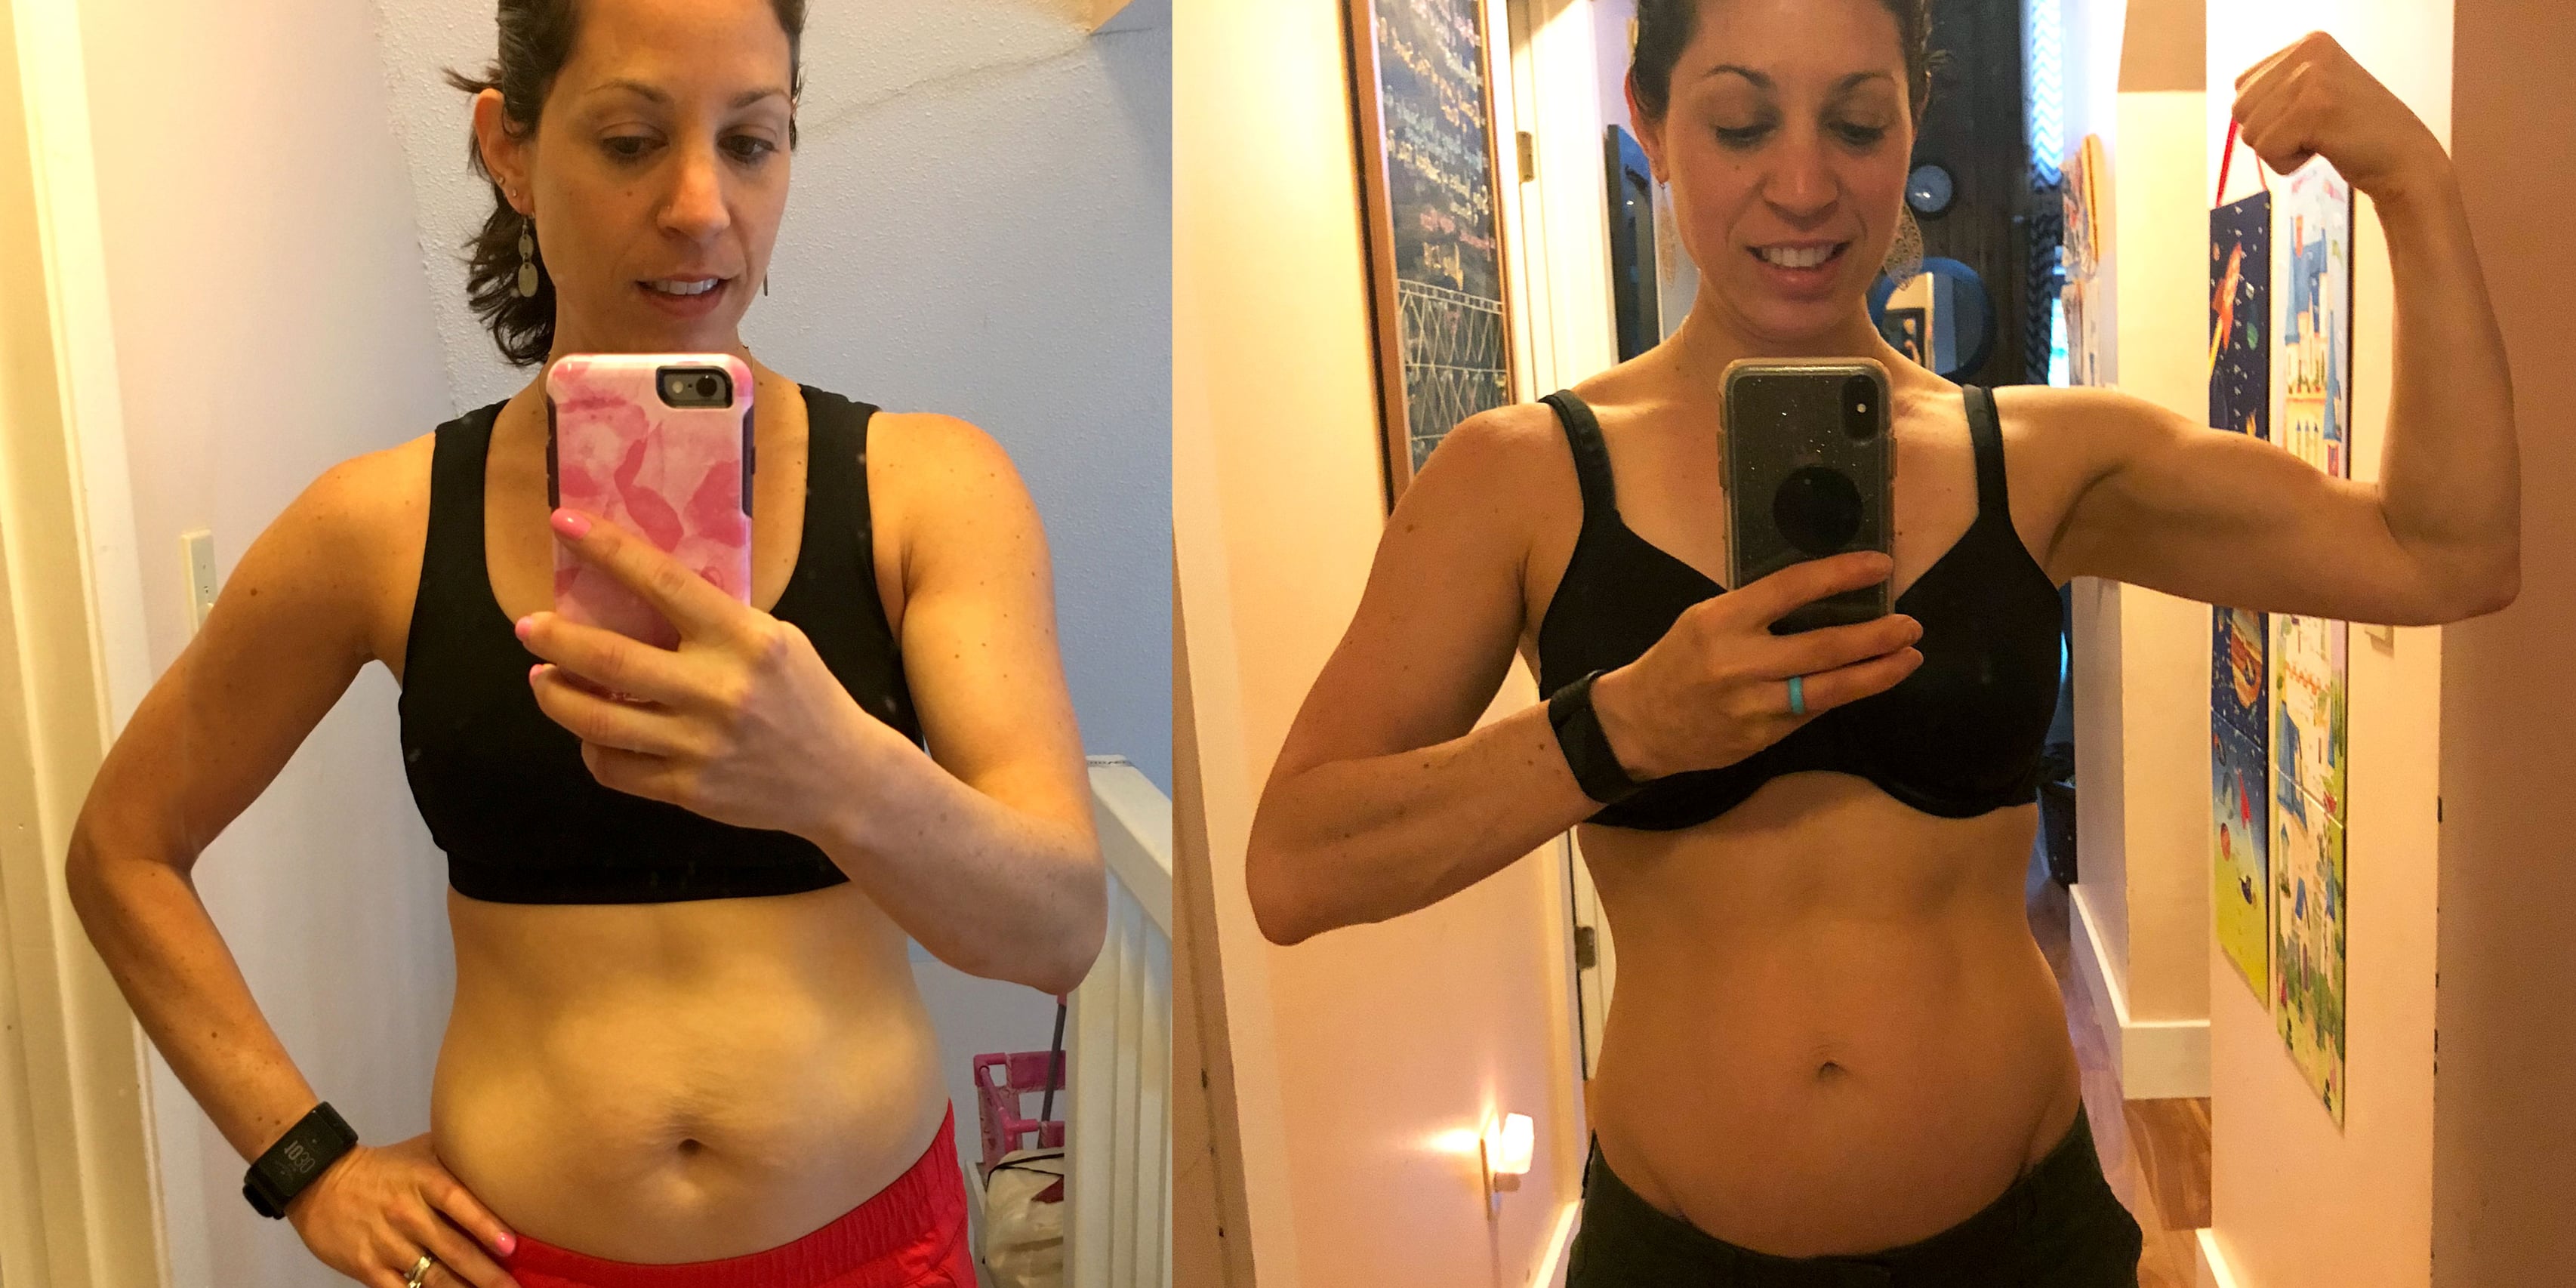 I'm a gym girl, my routine has given me incredible gains - and